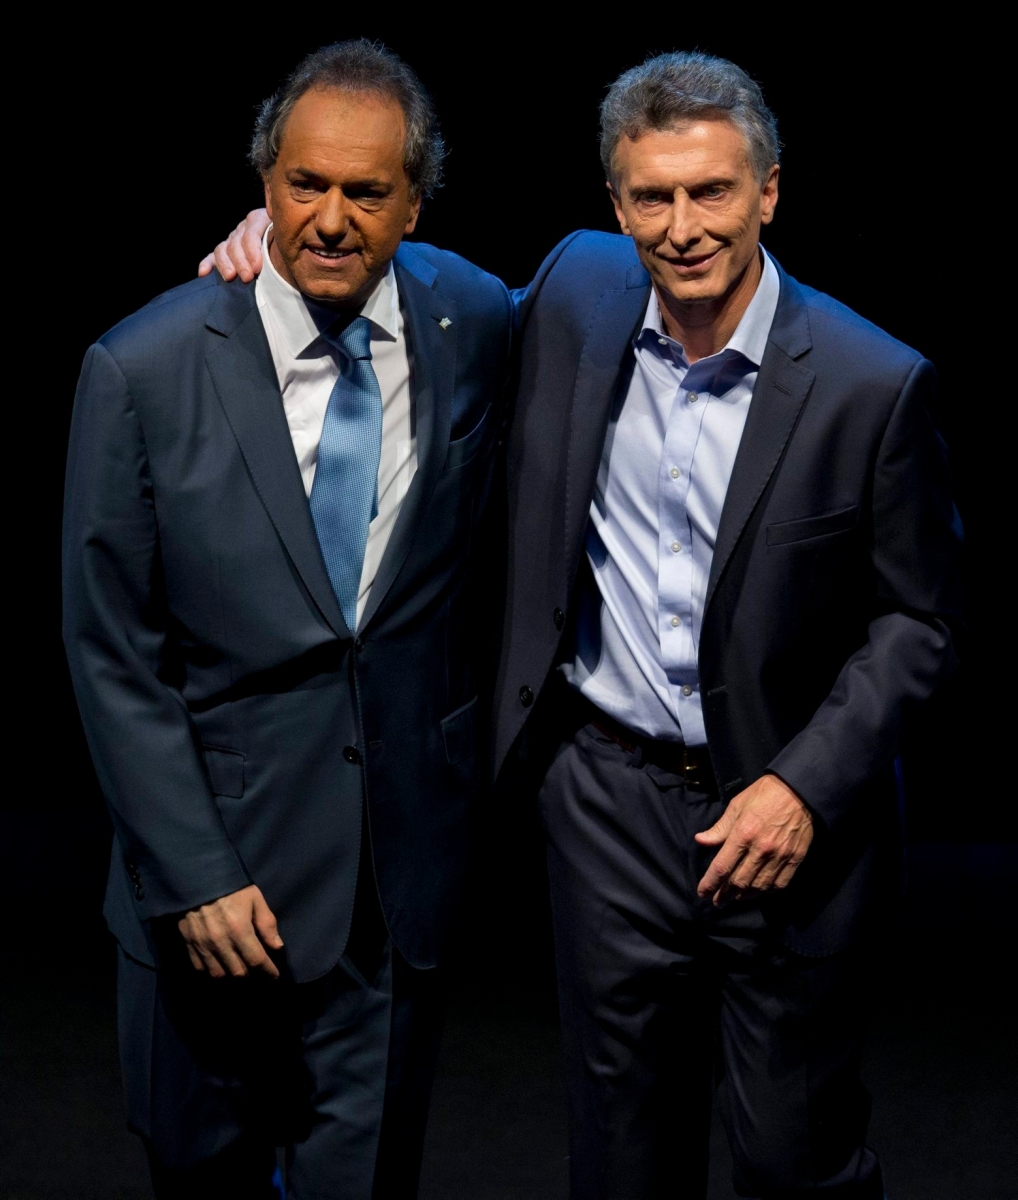 In this Nov. 15, 2015 photo, opposition presidential candidate Mauricio Macri, right, and Daniel Scioli, the ruling party presidential candidate embrace each other on stage at the end of the presidential debate in Buenos Aires, Argentina. Macri will face Scioli in a Nov. 22 runoff. Macri promises to maintain a safety net for the poor but says he will overhaul the economy to address inflation estimated around 30 percent and a byzantine monetary system that has spawned a booming black market. (AP Photo/Natacha Pisarenko) Argentina Elections